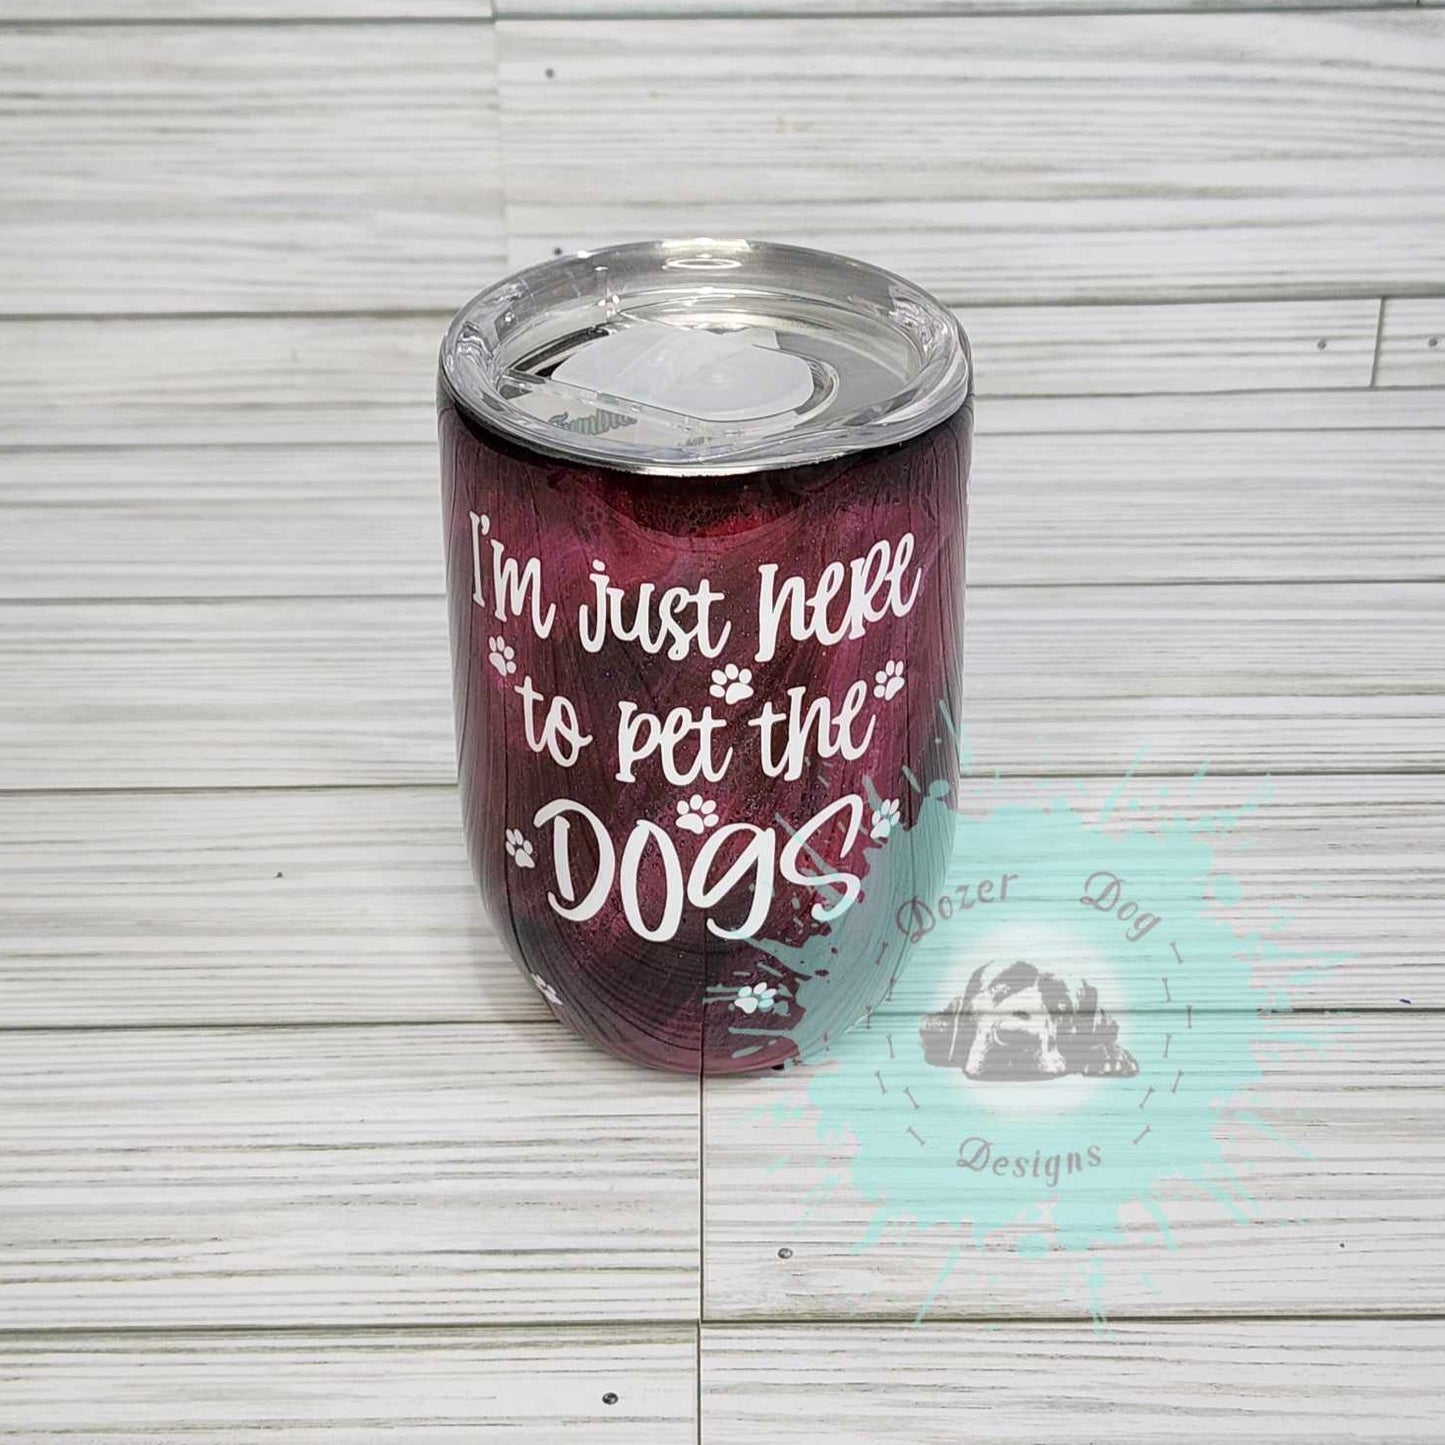 Hold my Drink Pet This Dog 12oz Wine Tumbler